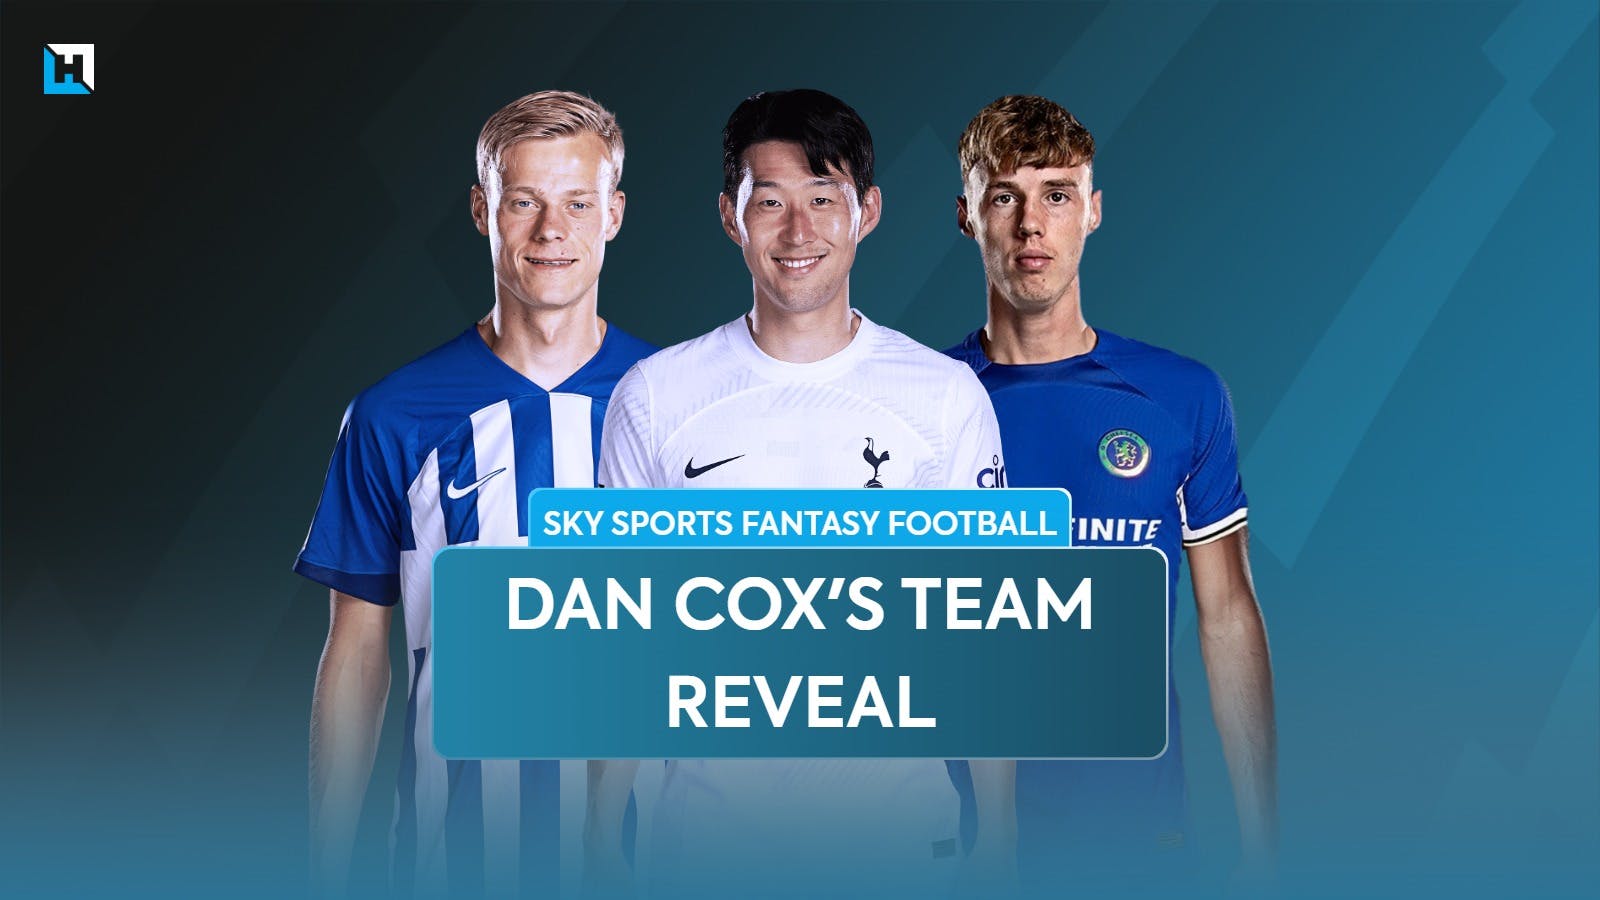 Dan Cox’s Sky Sports Fantasy Football Gameweek 34 preview and team reveal